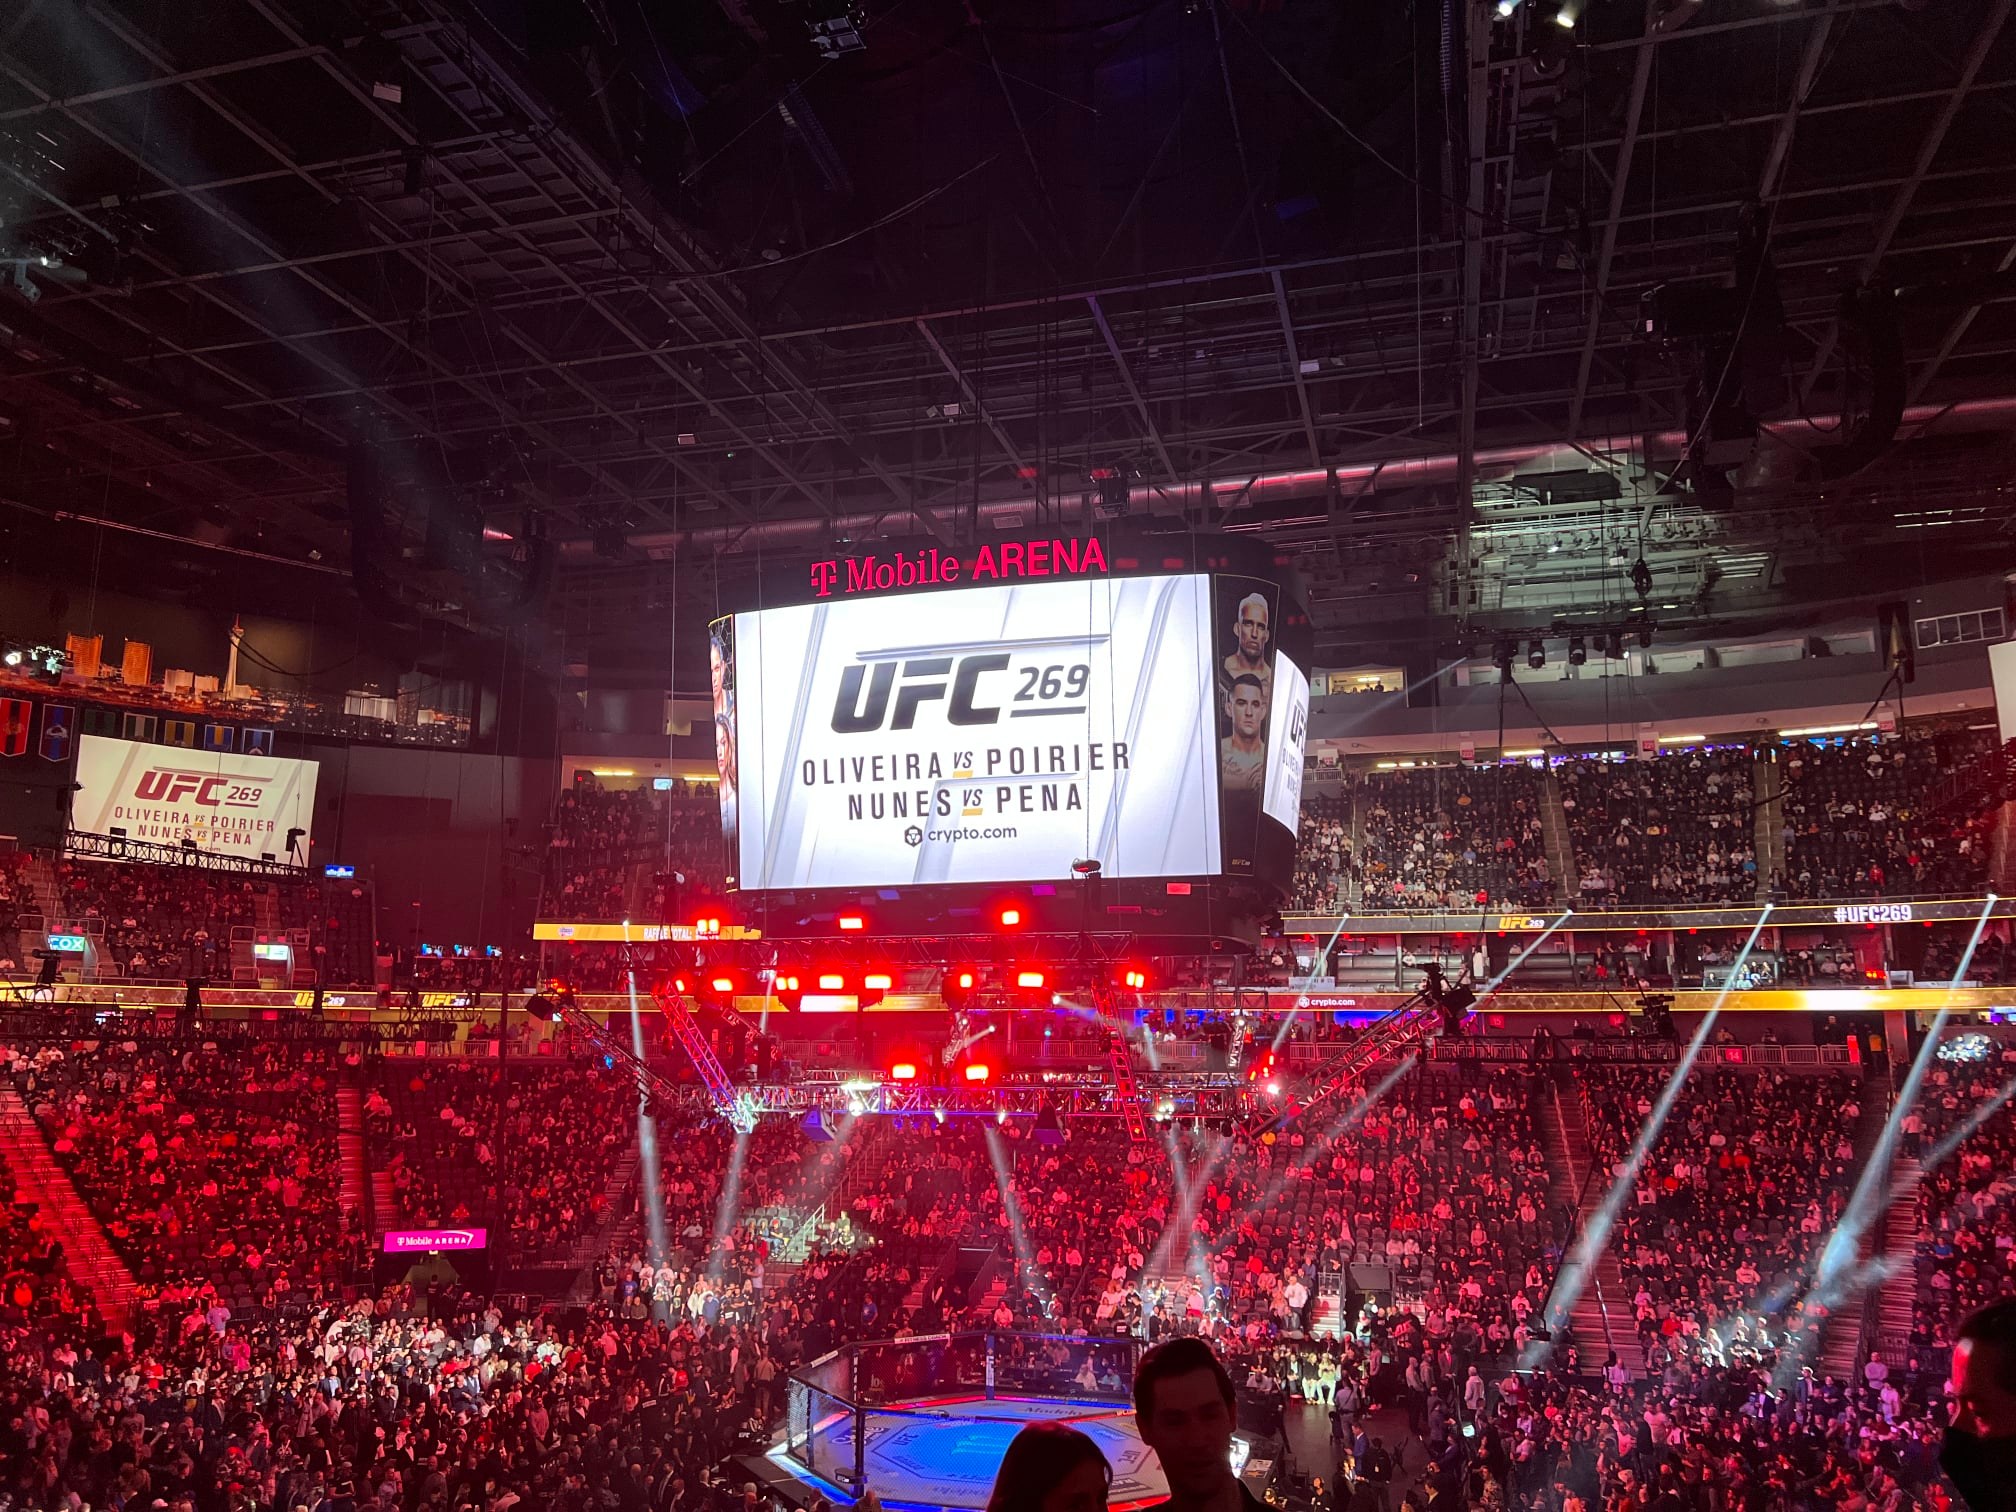 the view of the ultimate fighting championship (UFC) stage in las vegas, nevada